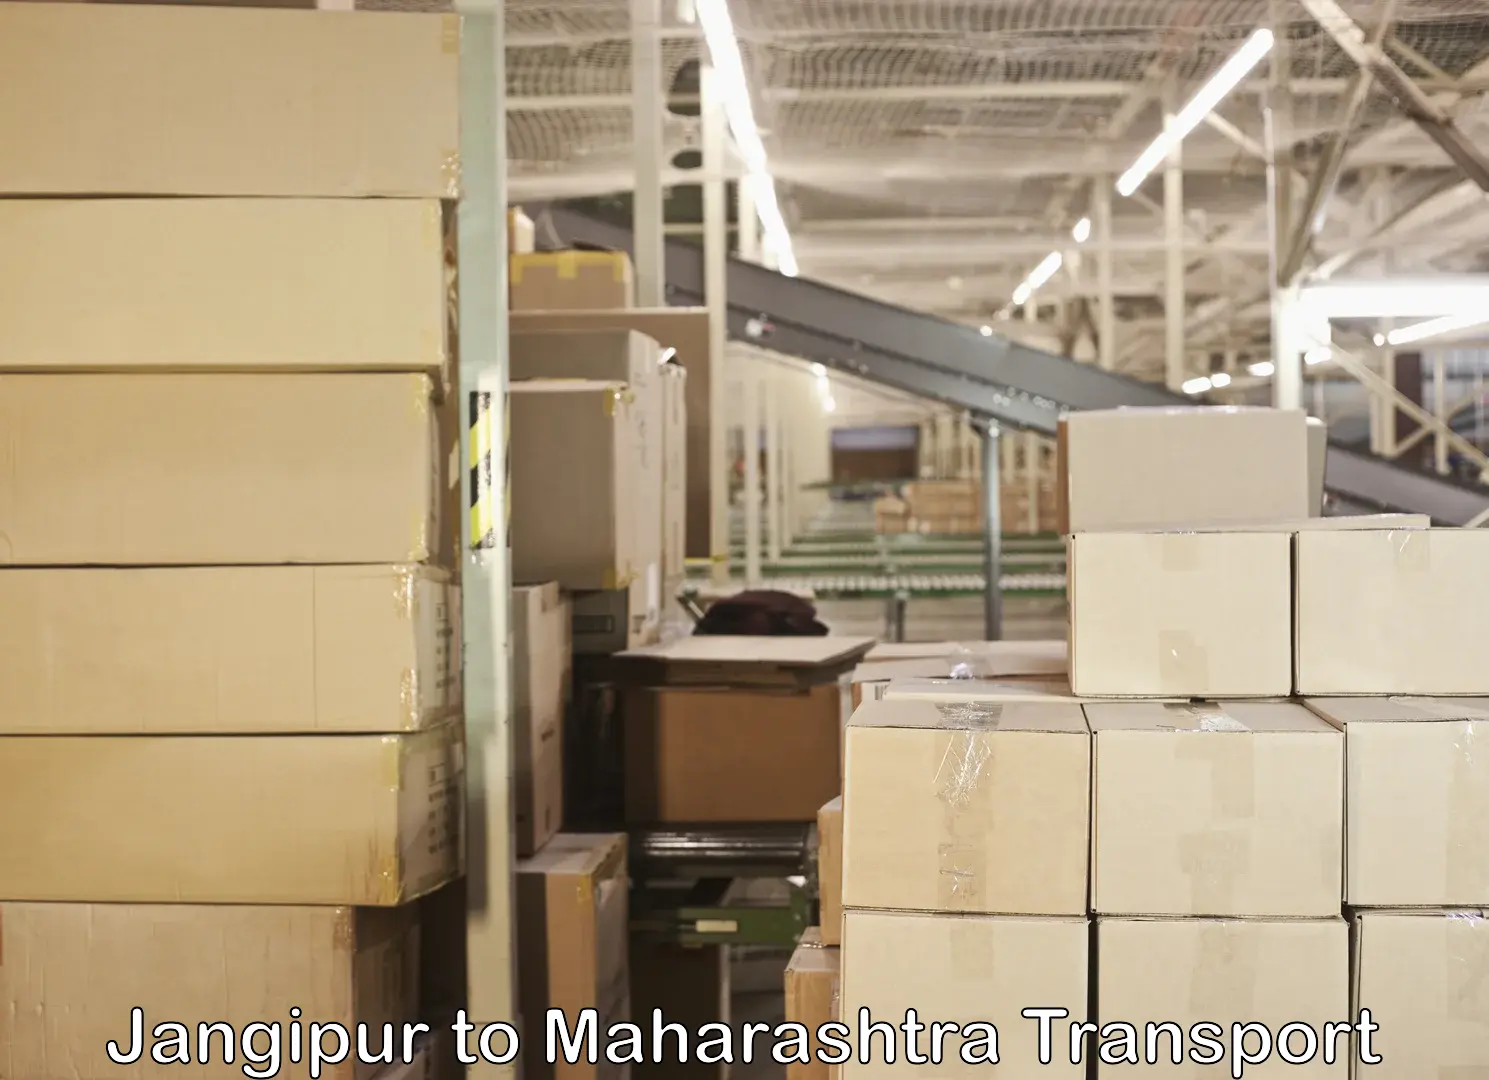 Truck transport companies in India in Jangipur to Maharashtra